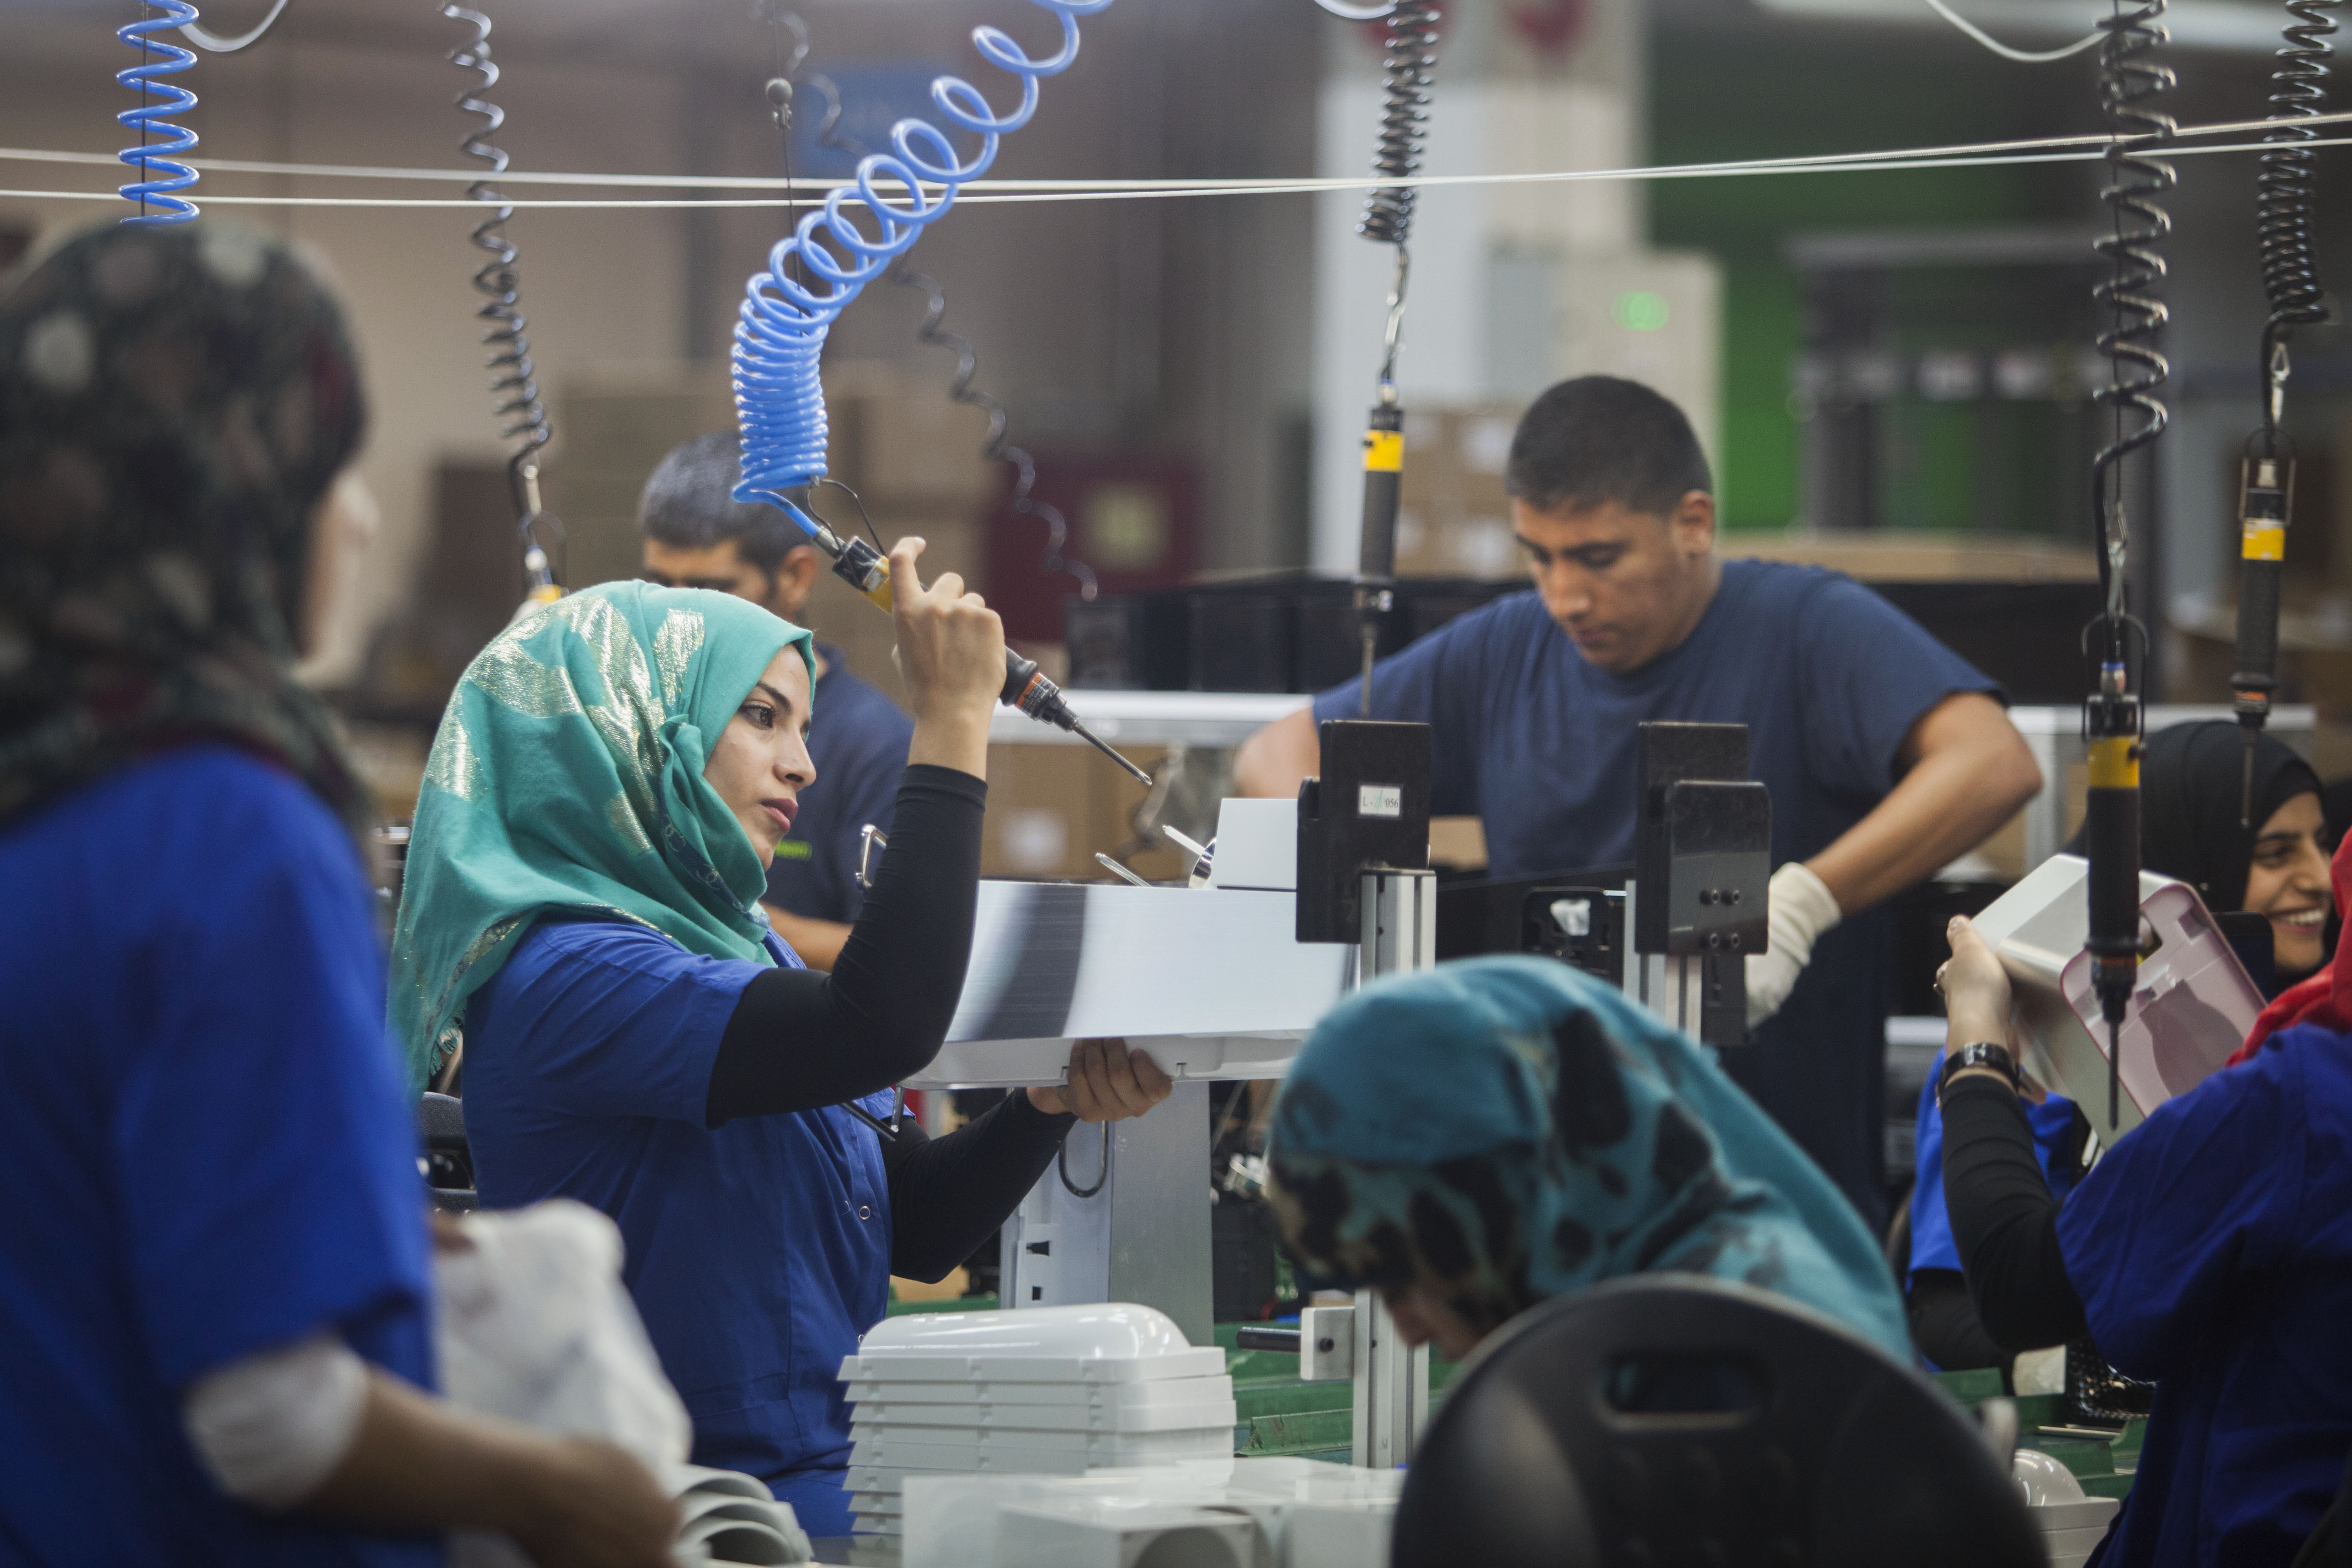 Israelis and Palestinians work side-by-side at a SodaStream factory. If the UN Human Rights Council’s blacklist achieves its goal, the workers will all be out of jobs: The UNHRC considers that the collaborative industry going on here is a “war crime.”